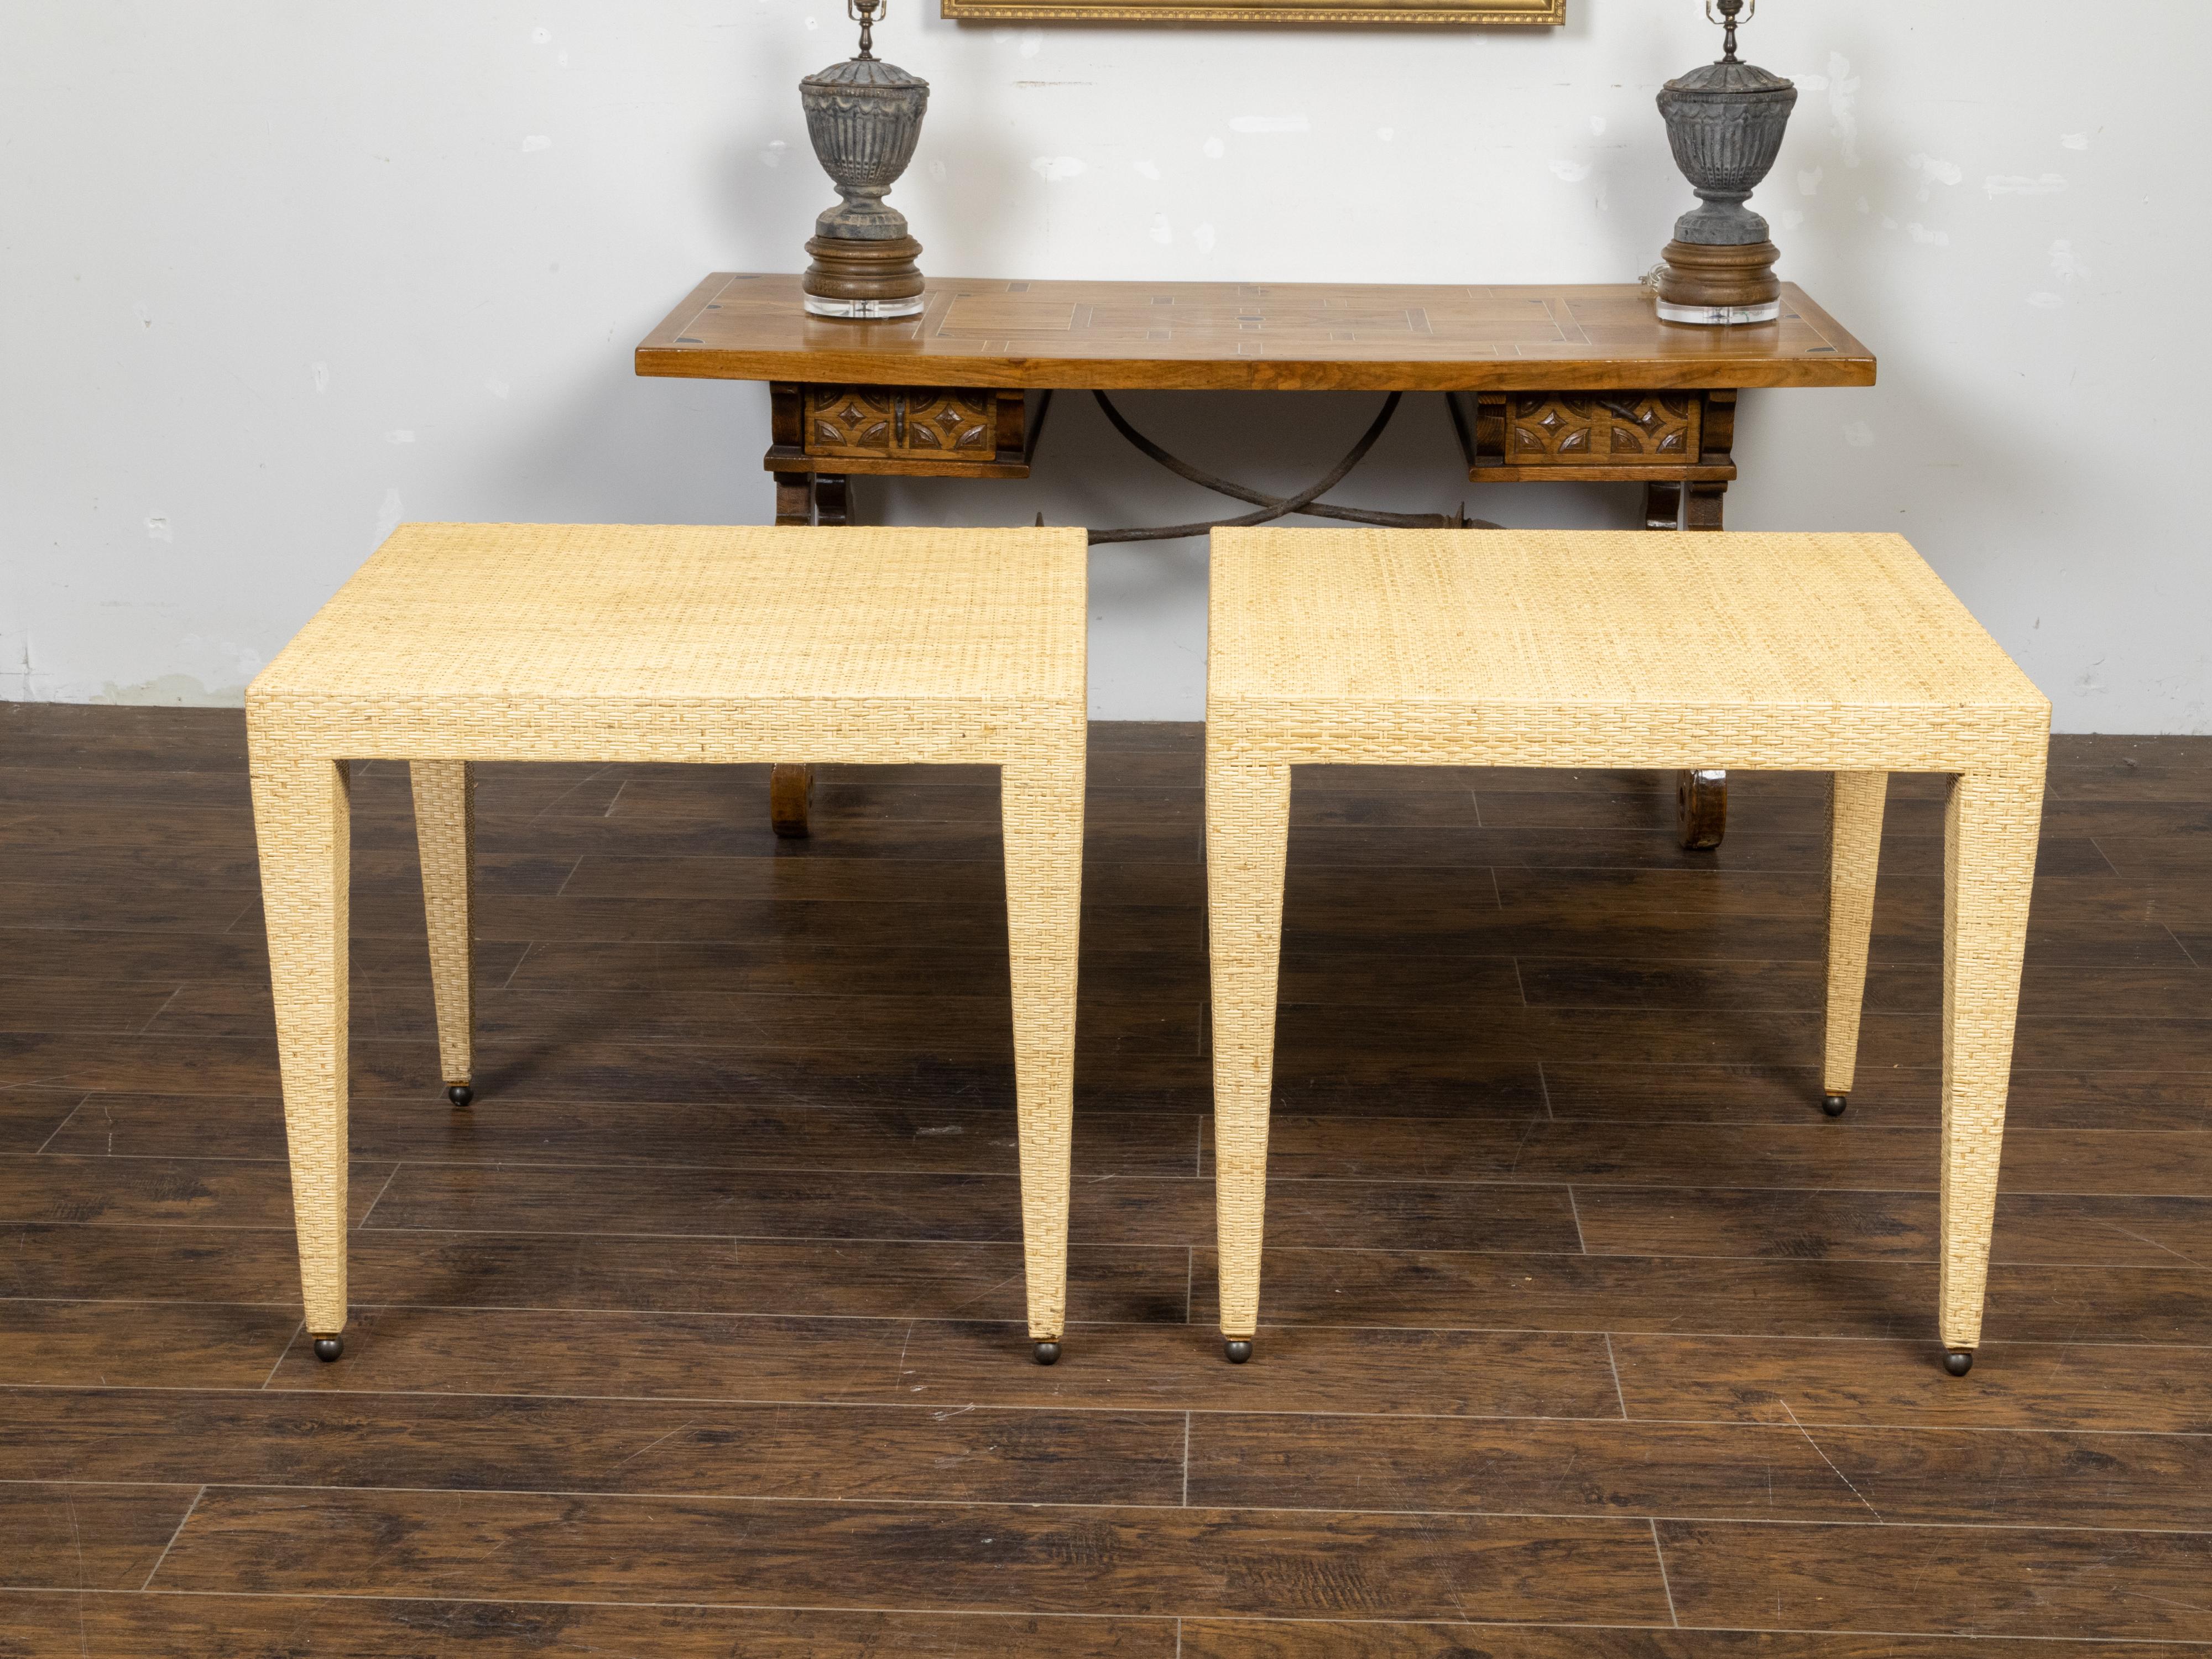 Pair of Baker Furniture Midcentury Wicker Side Tables with Tapered Legs In Good Condition For Sale In Atlanta, GA